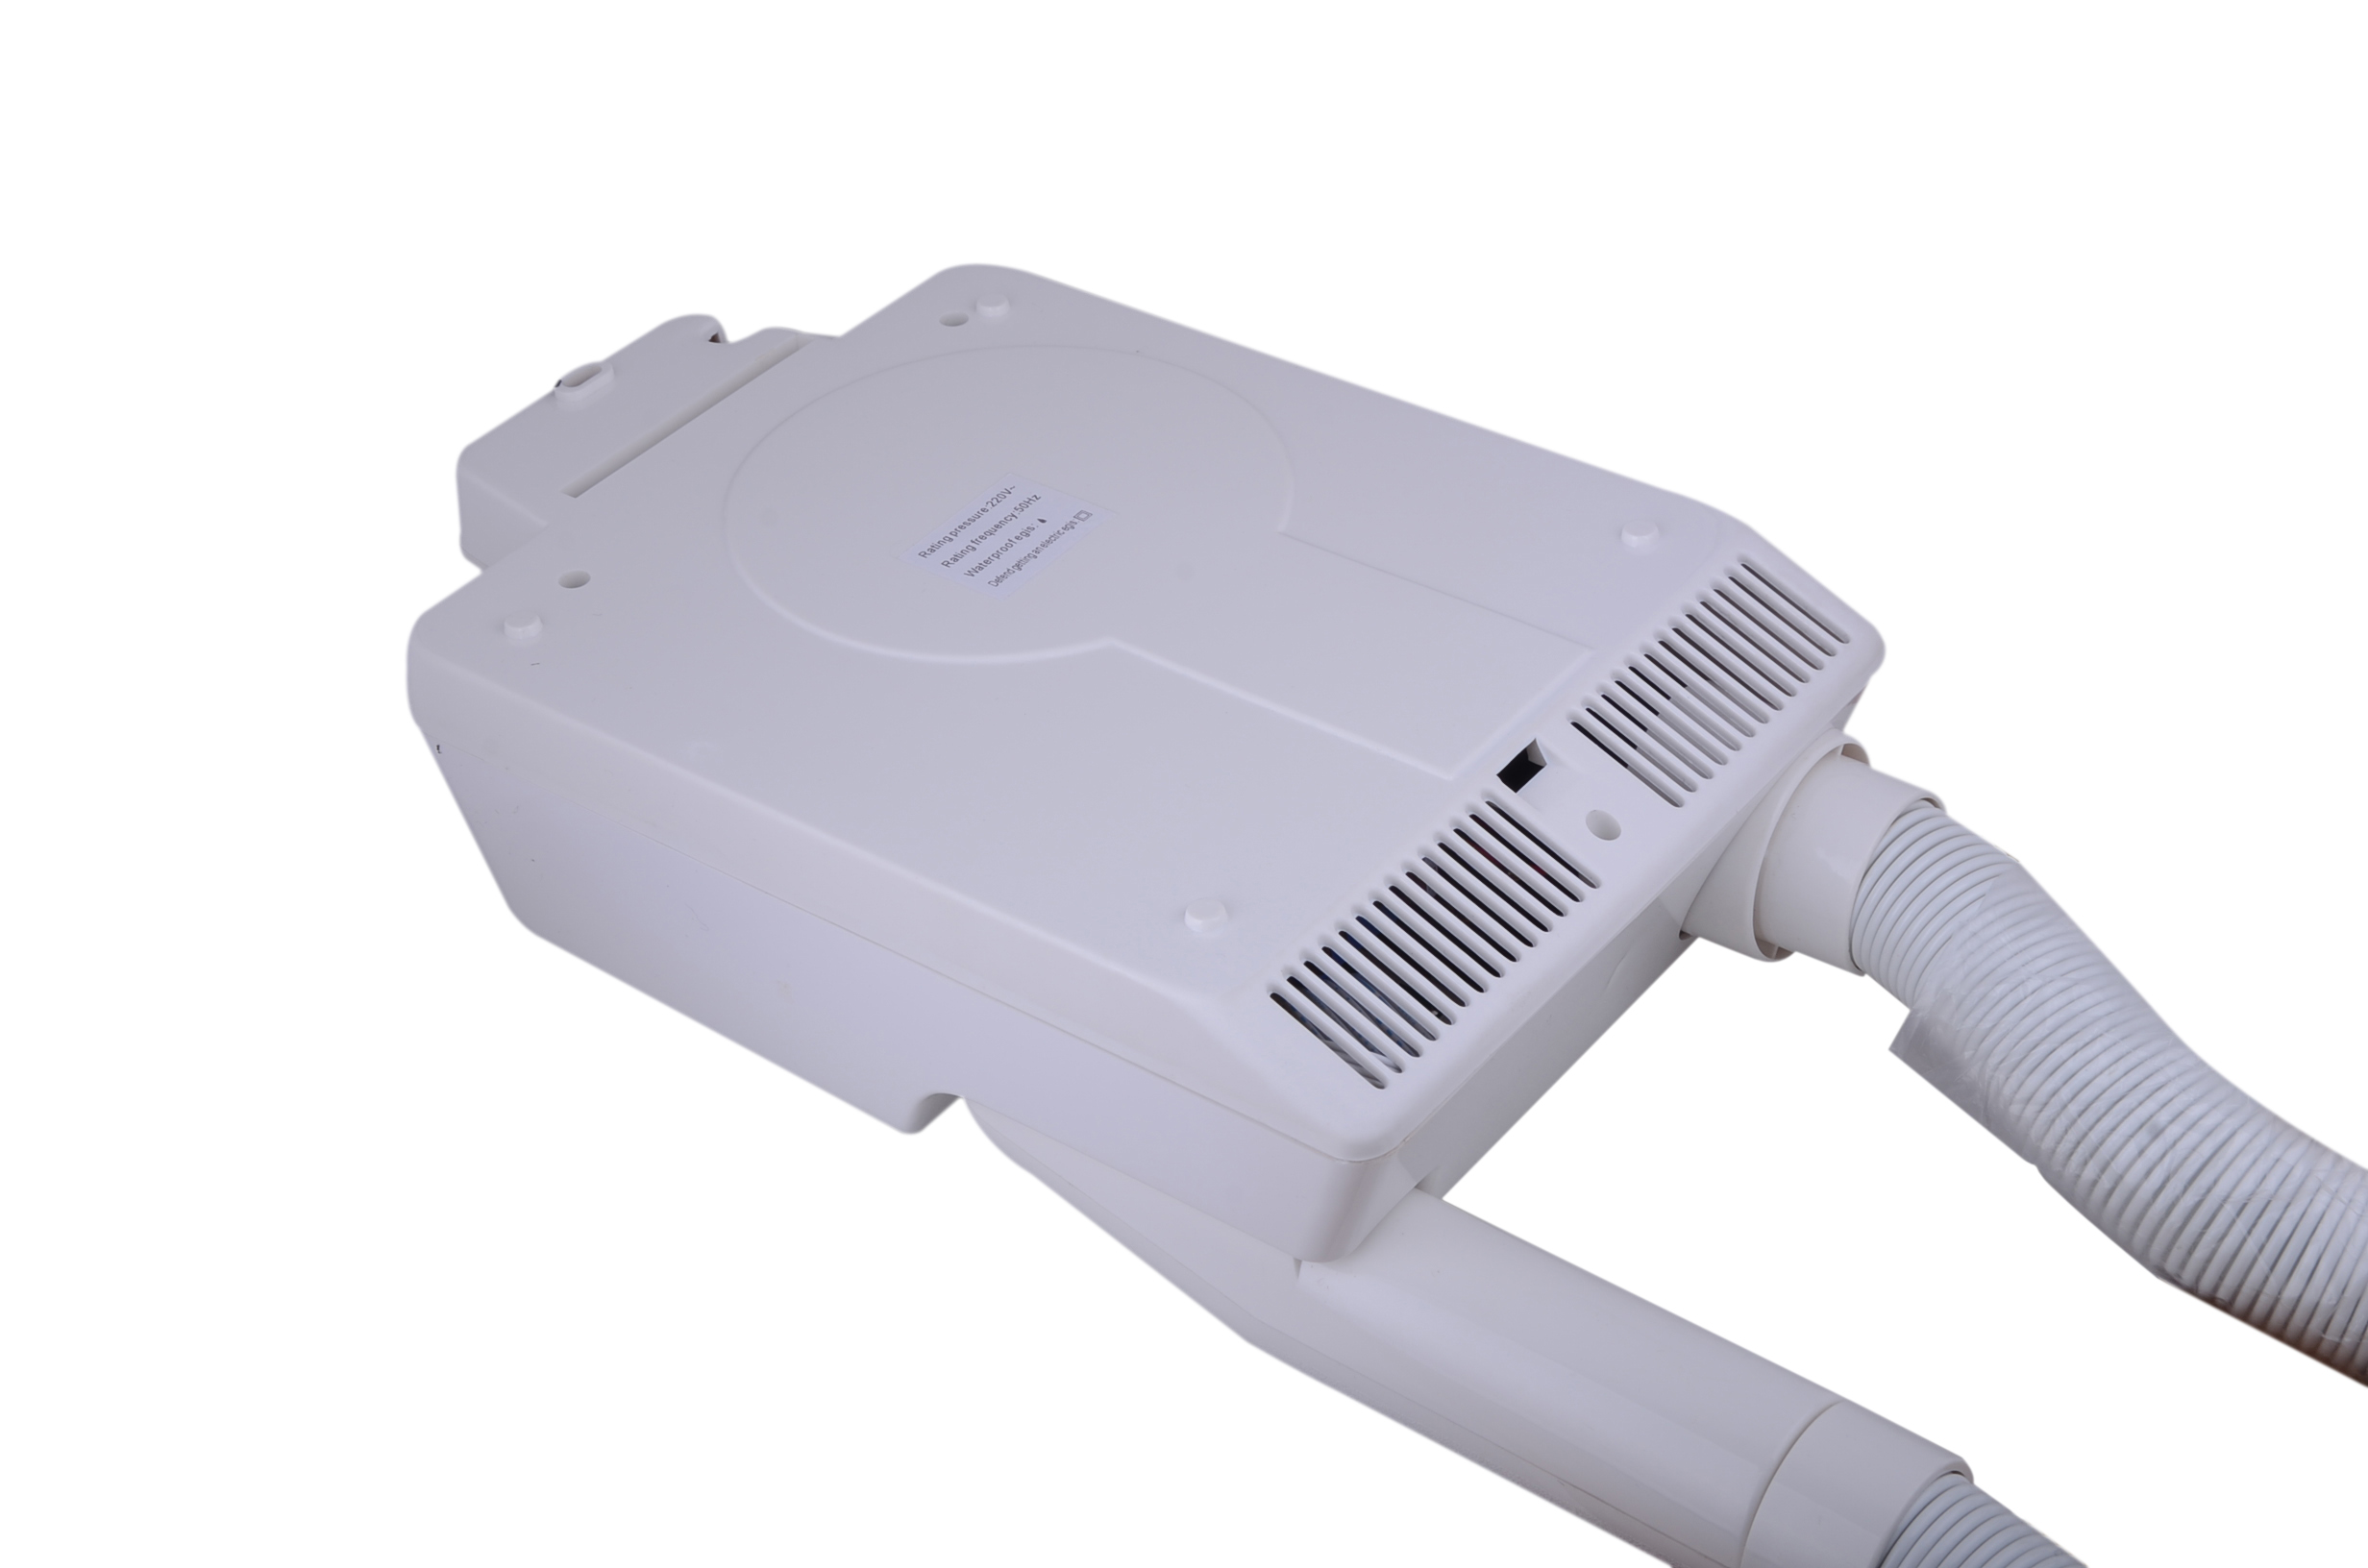 Wholesale And Retain Bathroom Wall Mounted Hair And Skin Dryer ABS Plastic Electronic Dryer Machine White Color